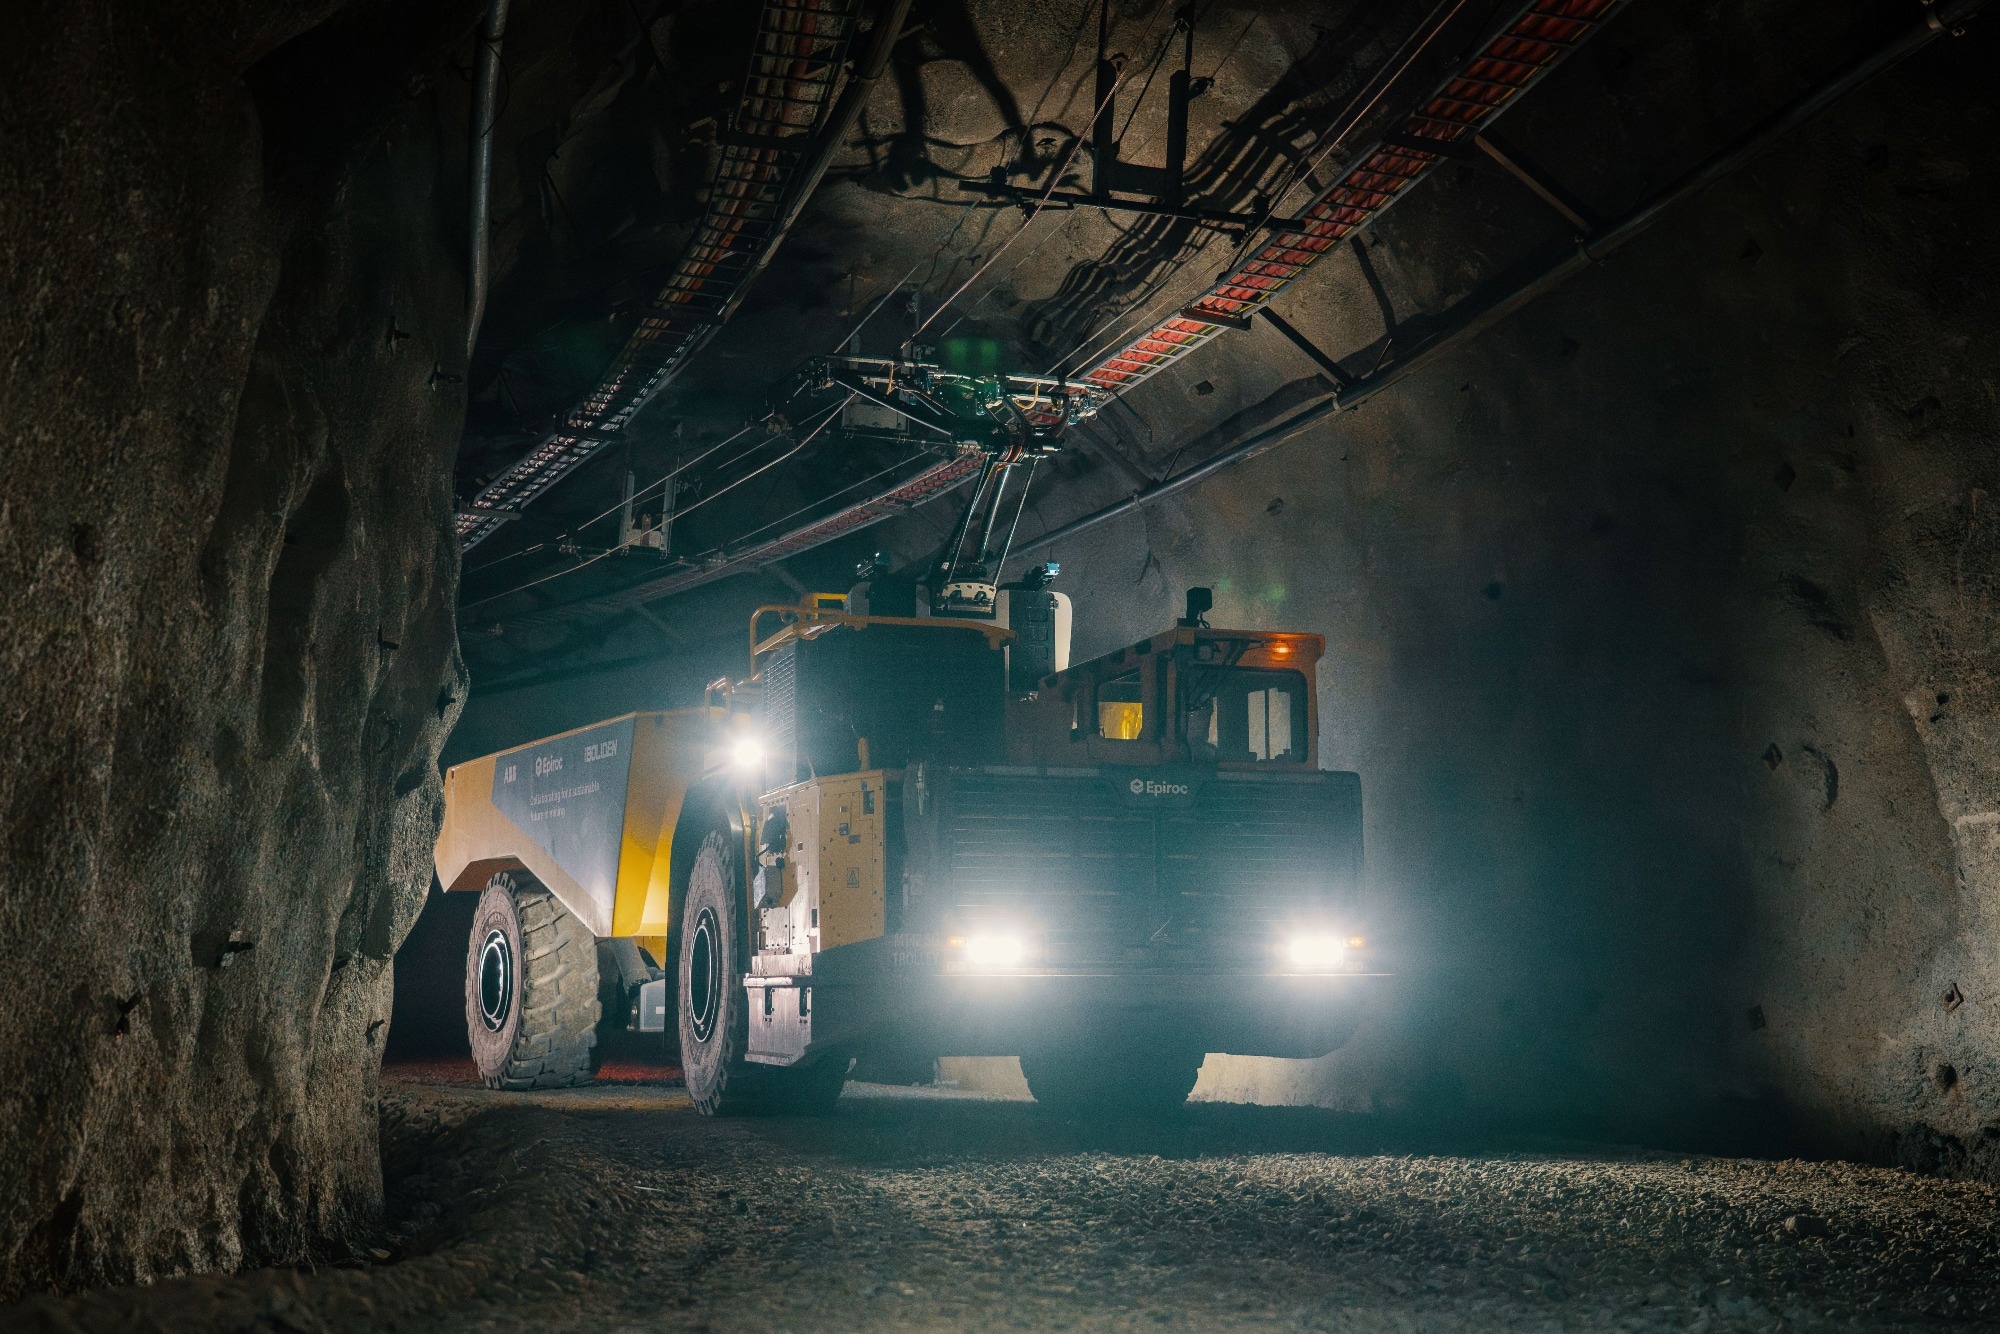 Boliden, Epiroc and ABB Make First Battery-Electric Truck Trolley System for Underground Mining a Reality